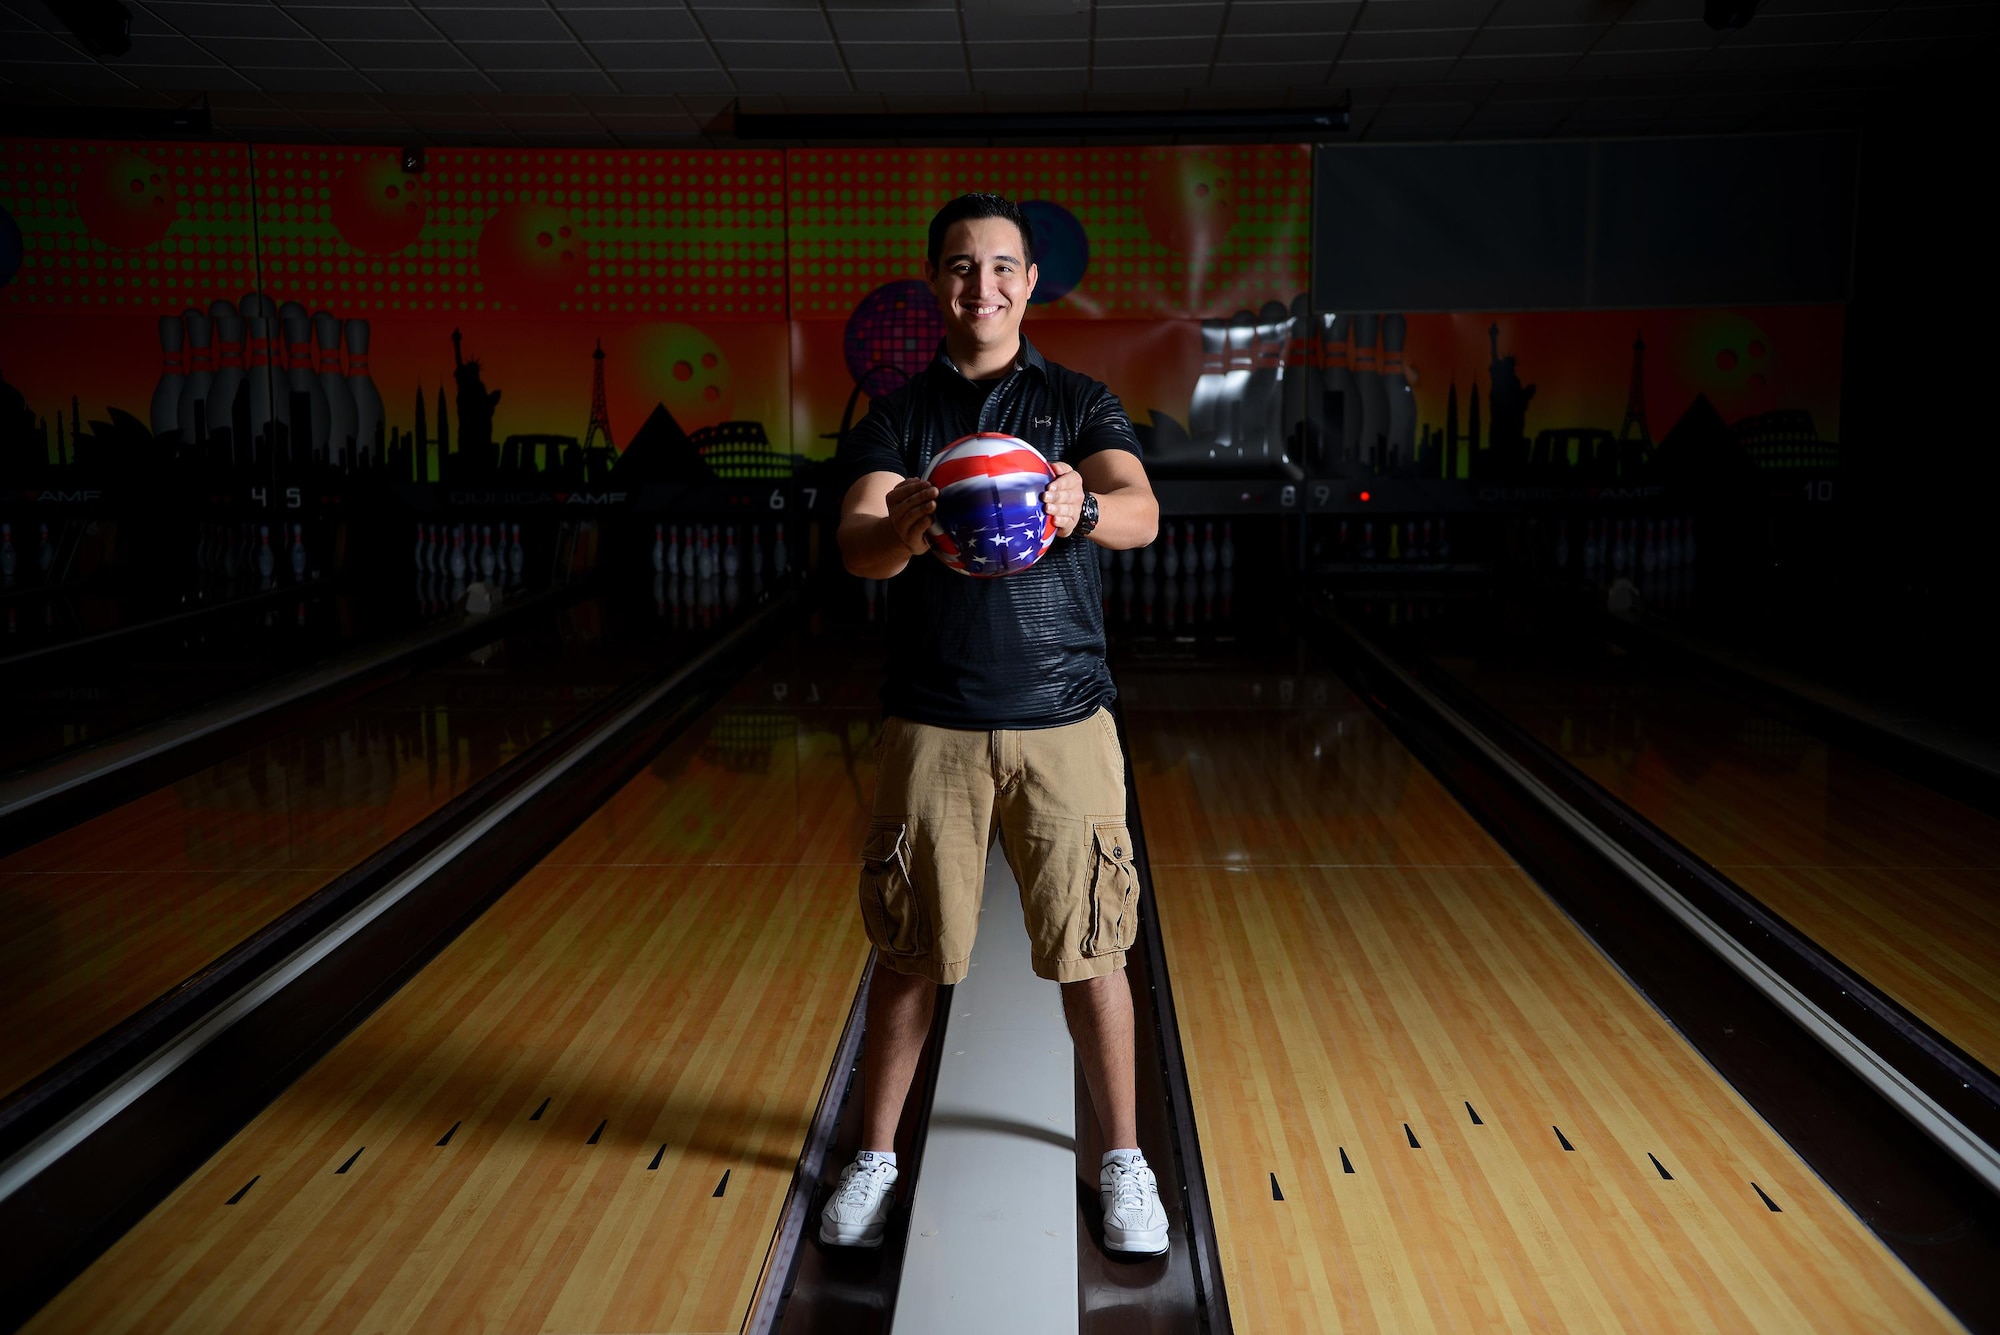 Senior Airman Javier Perez, 47th Medical Support Squadron diagnostic imaging technologist, poses at Cactus Lanes Bowling Center on Laughlin Air Force Base, Texas, Oct. 16, 2015. Perez’s hobby in bowling grew into a passion that has followed him to adulthood.  (U.S. Air Force photo by Airman 1st Class Ariel D. Partlow) (Released)